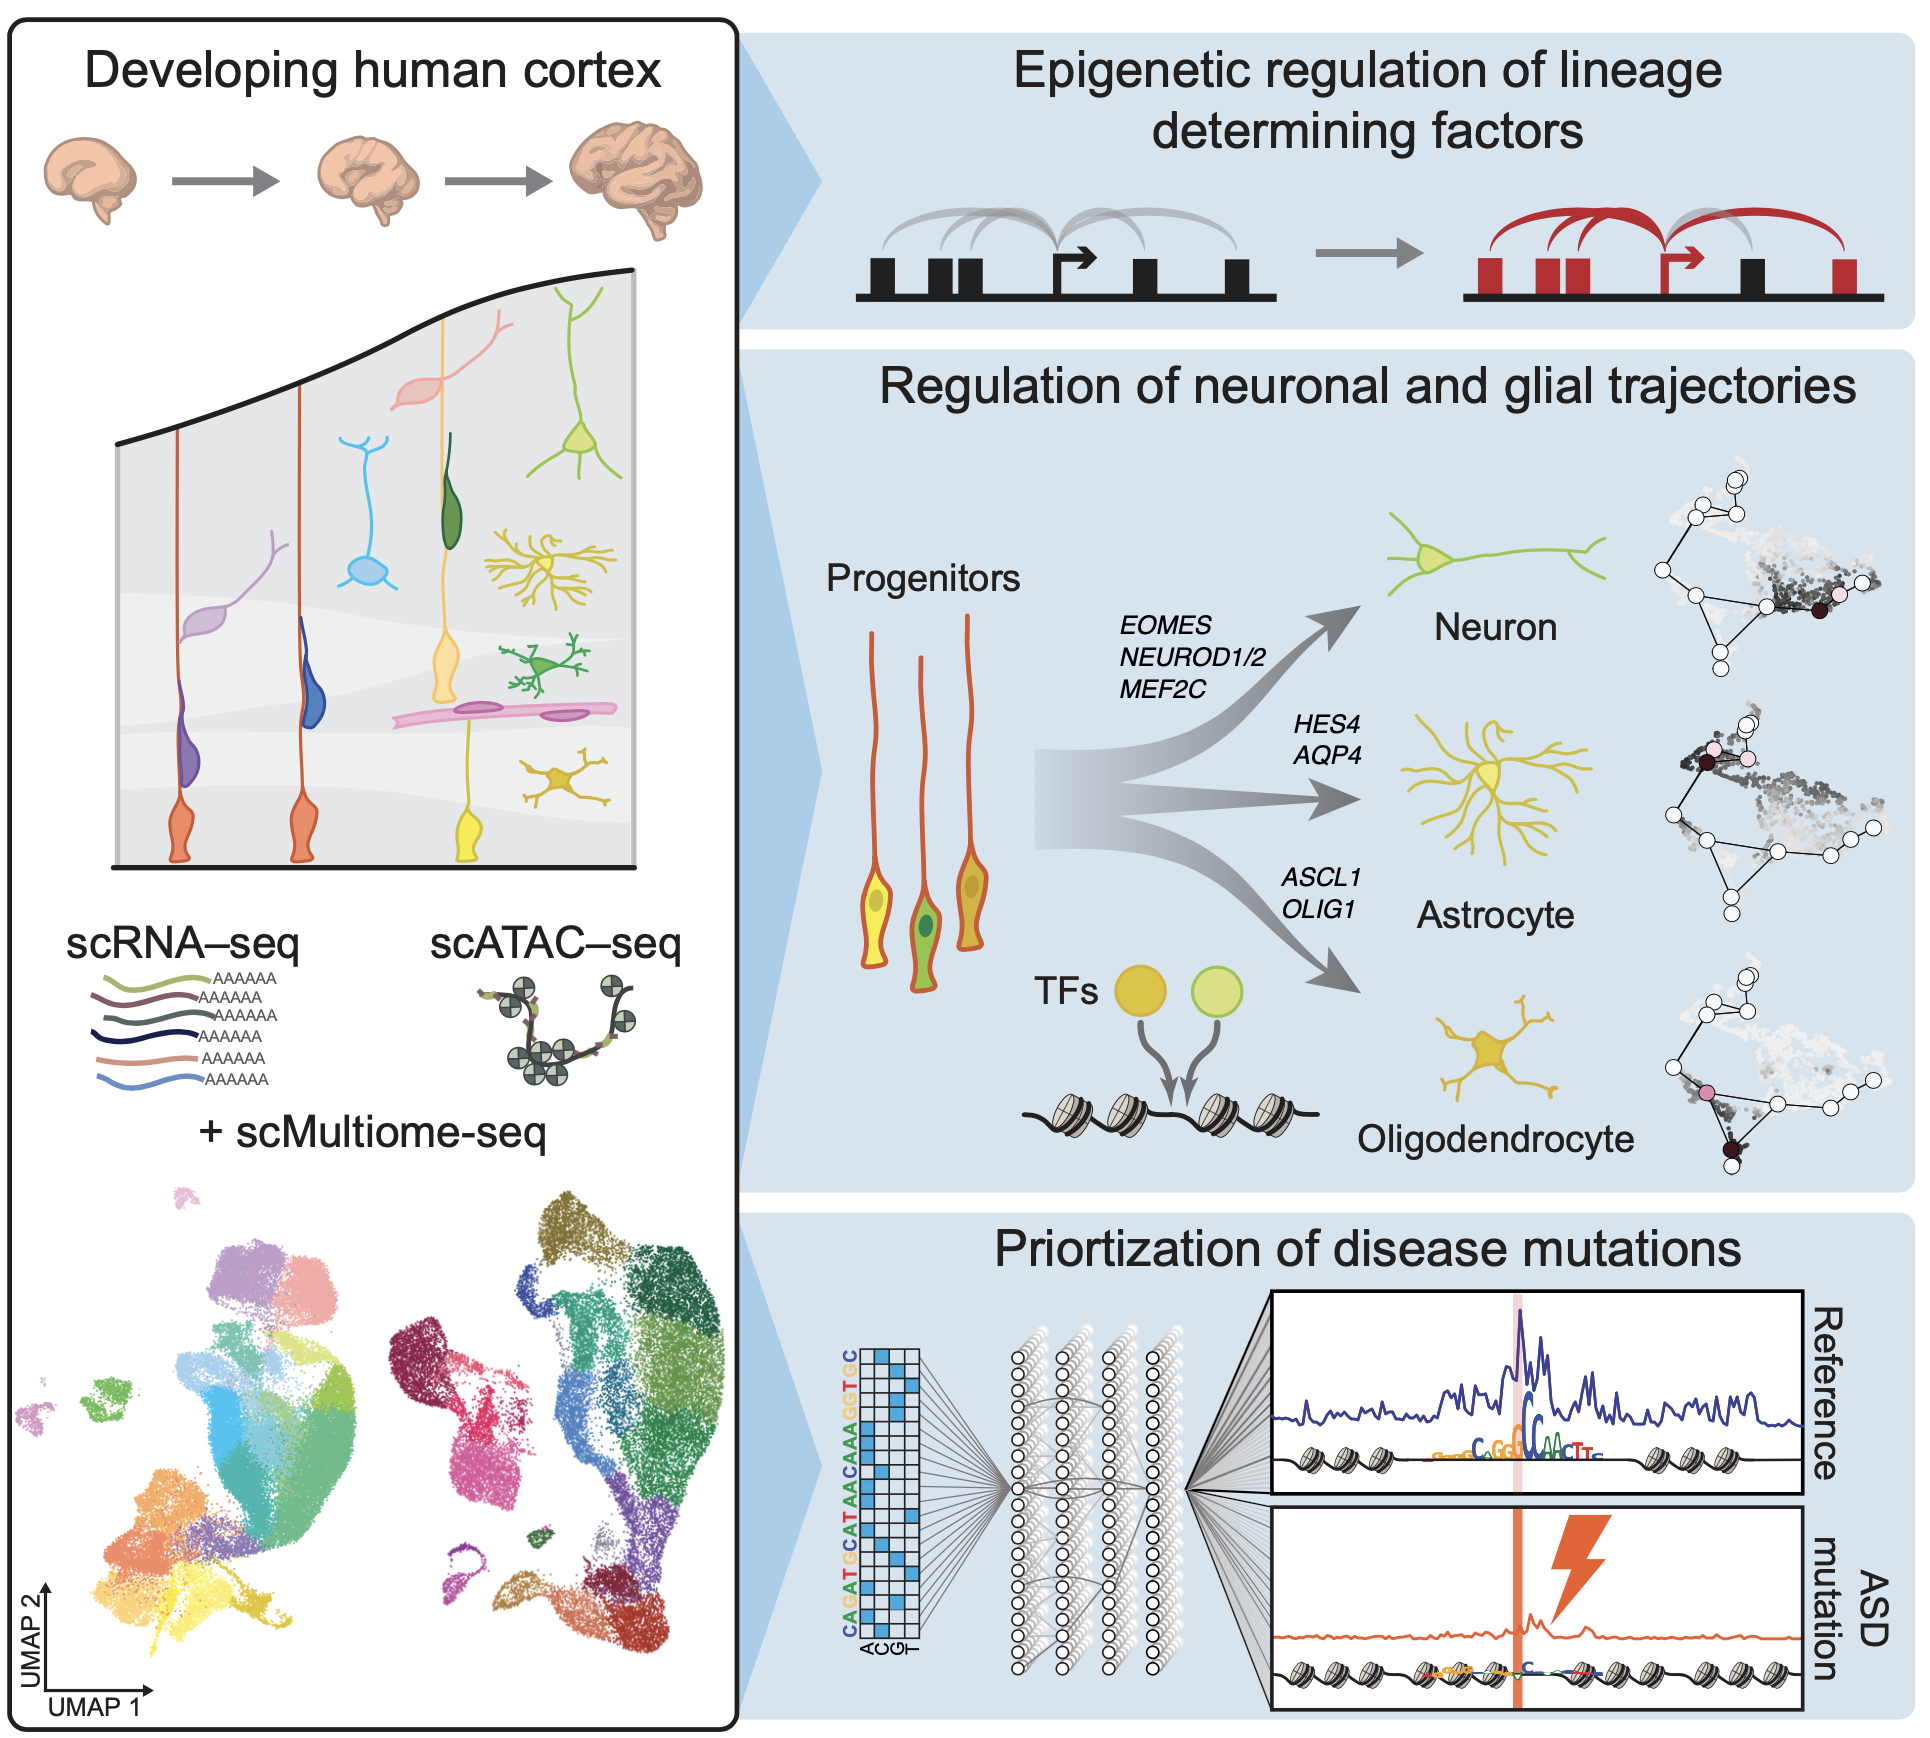 New paper: Chromatin and gene-regulatory dynamics of the developing human cerebral cortex at single-cell resolution